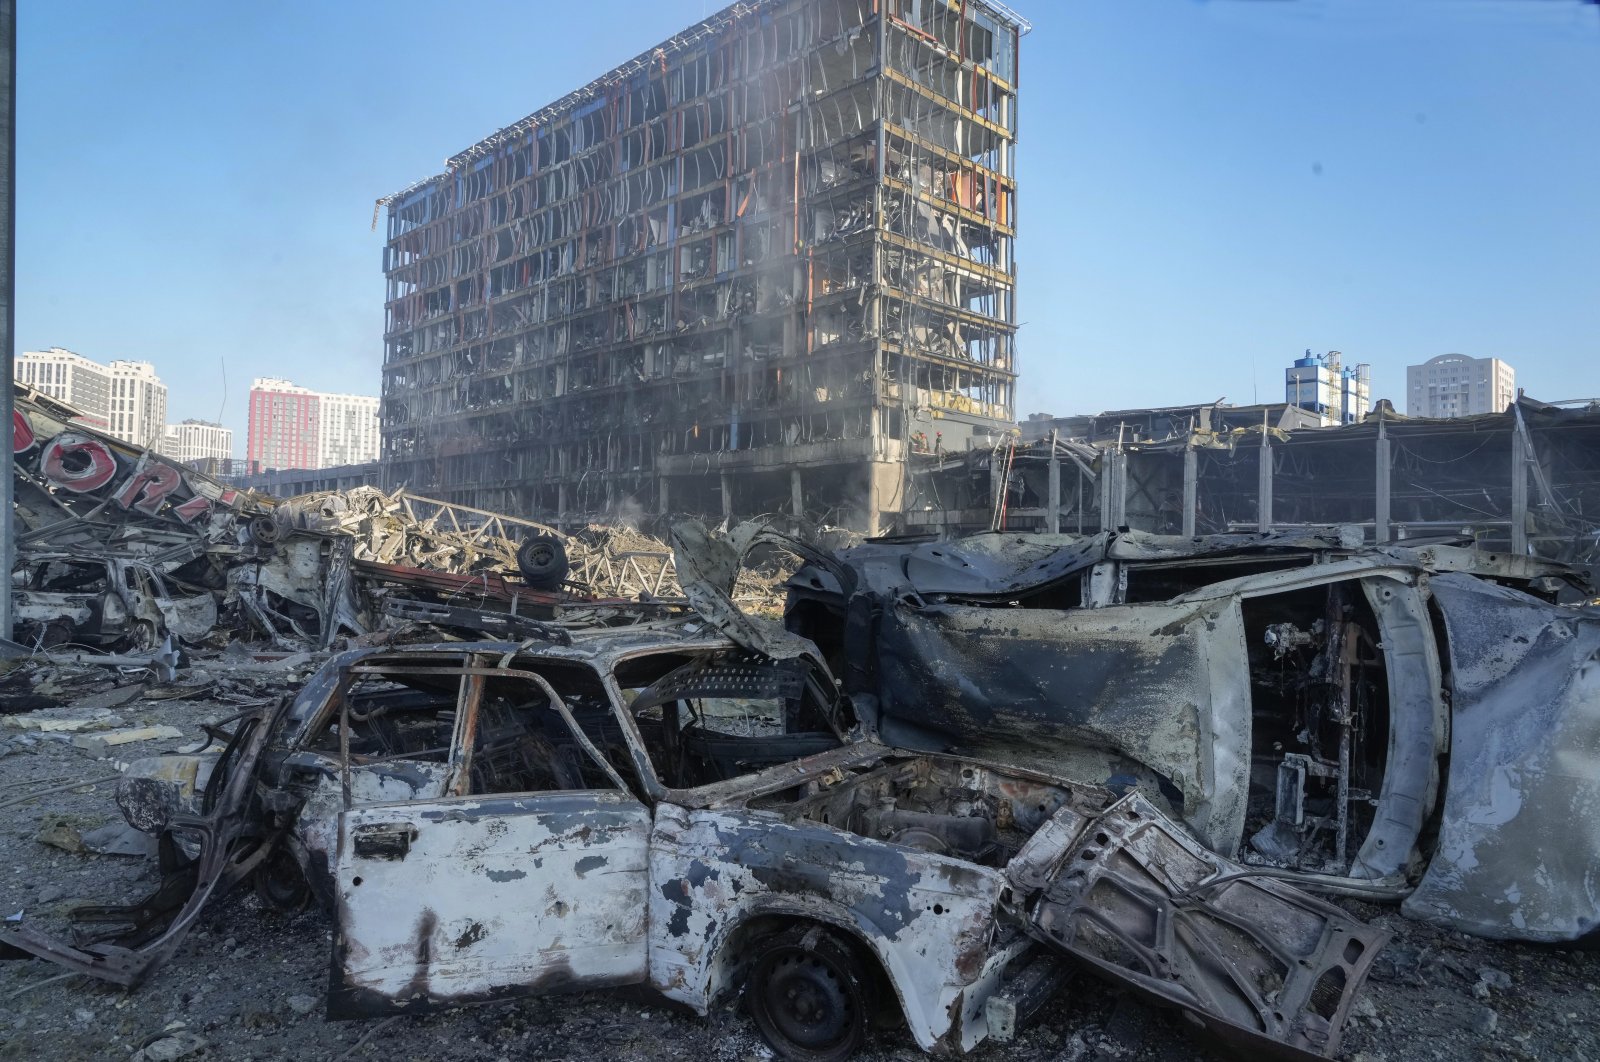 A view of the damage after the Russian shelling of a shopping center, in Kyiv, Ukraine, March 21, 2022. (AP)